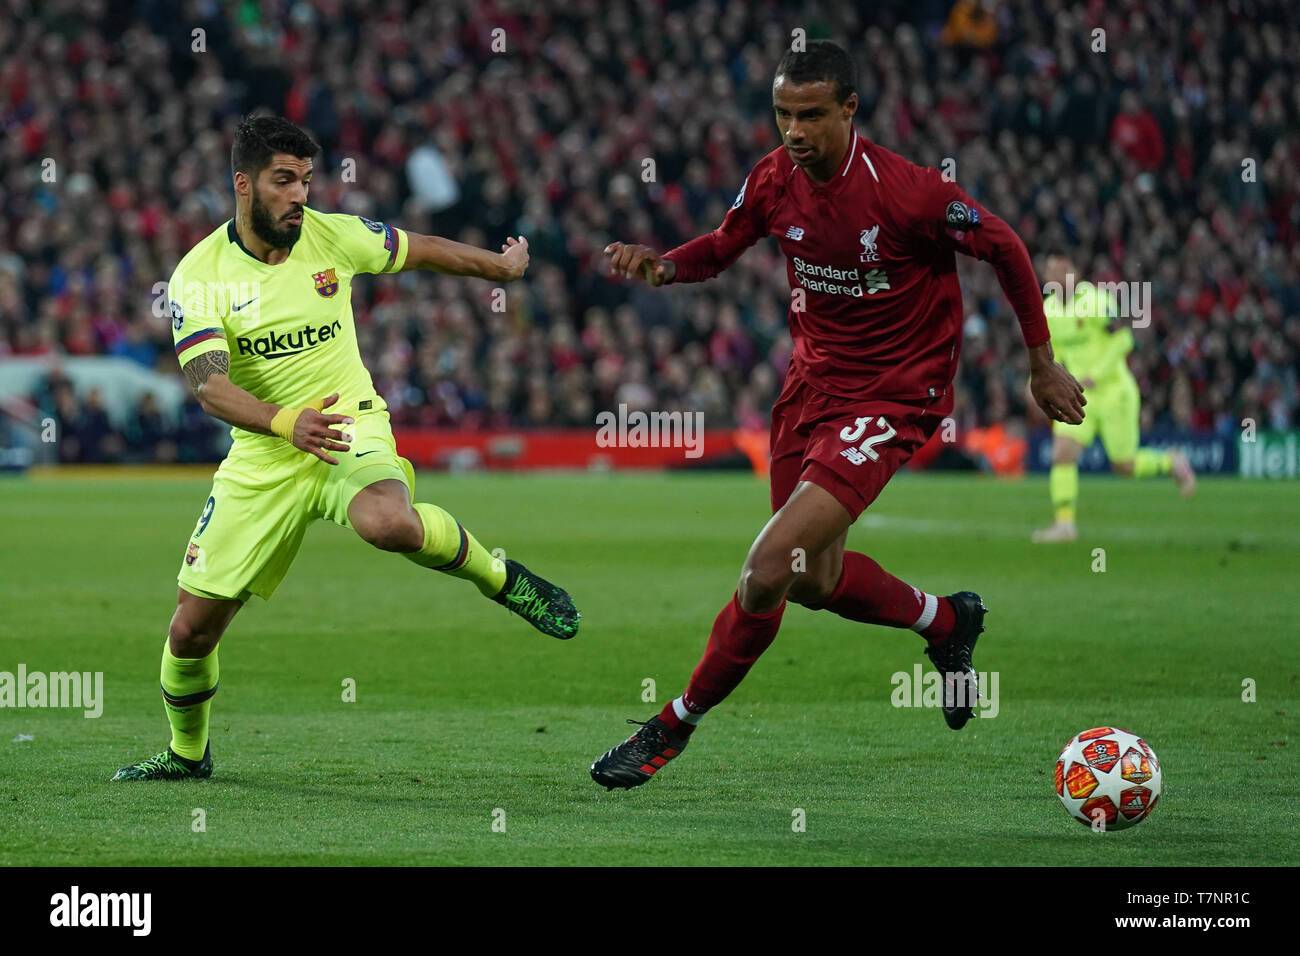 Liverpool's Joel Matip under pressure from  Barcelona's Luis Suarez  7th Mayl 2019 , Anfield Stadium, Liverpool, England;  UEFA Champions League Semi Final, Second Leg, Liverpool FC vs FC Barcelona   Credit: Terry Donnelly/News Images Stock Photo